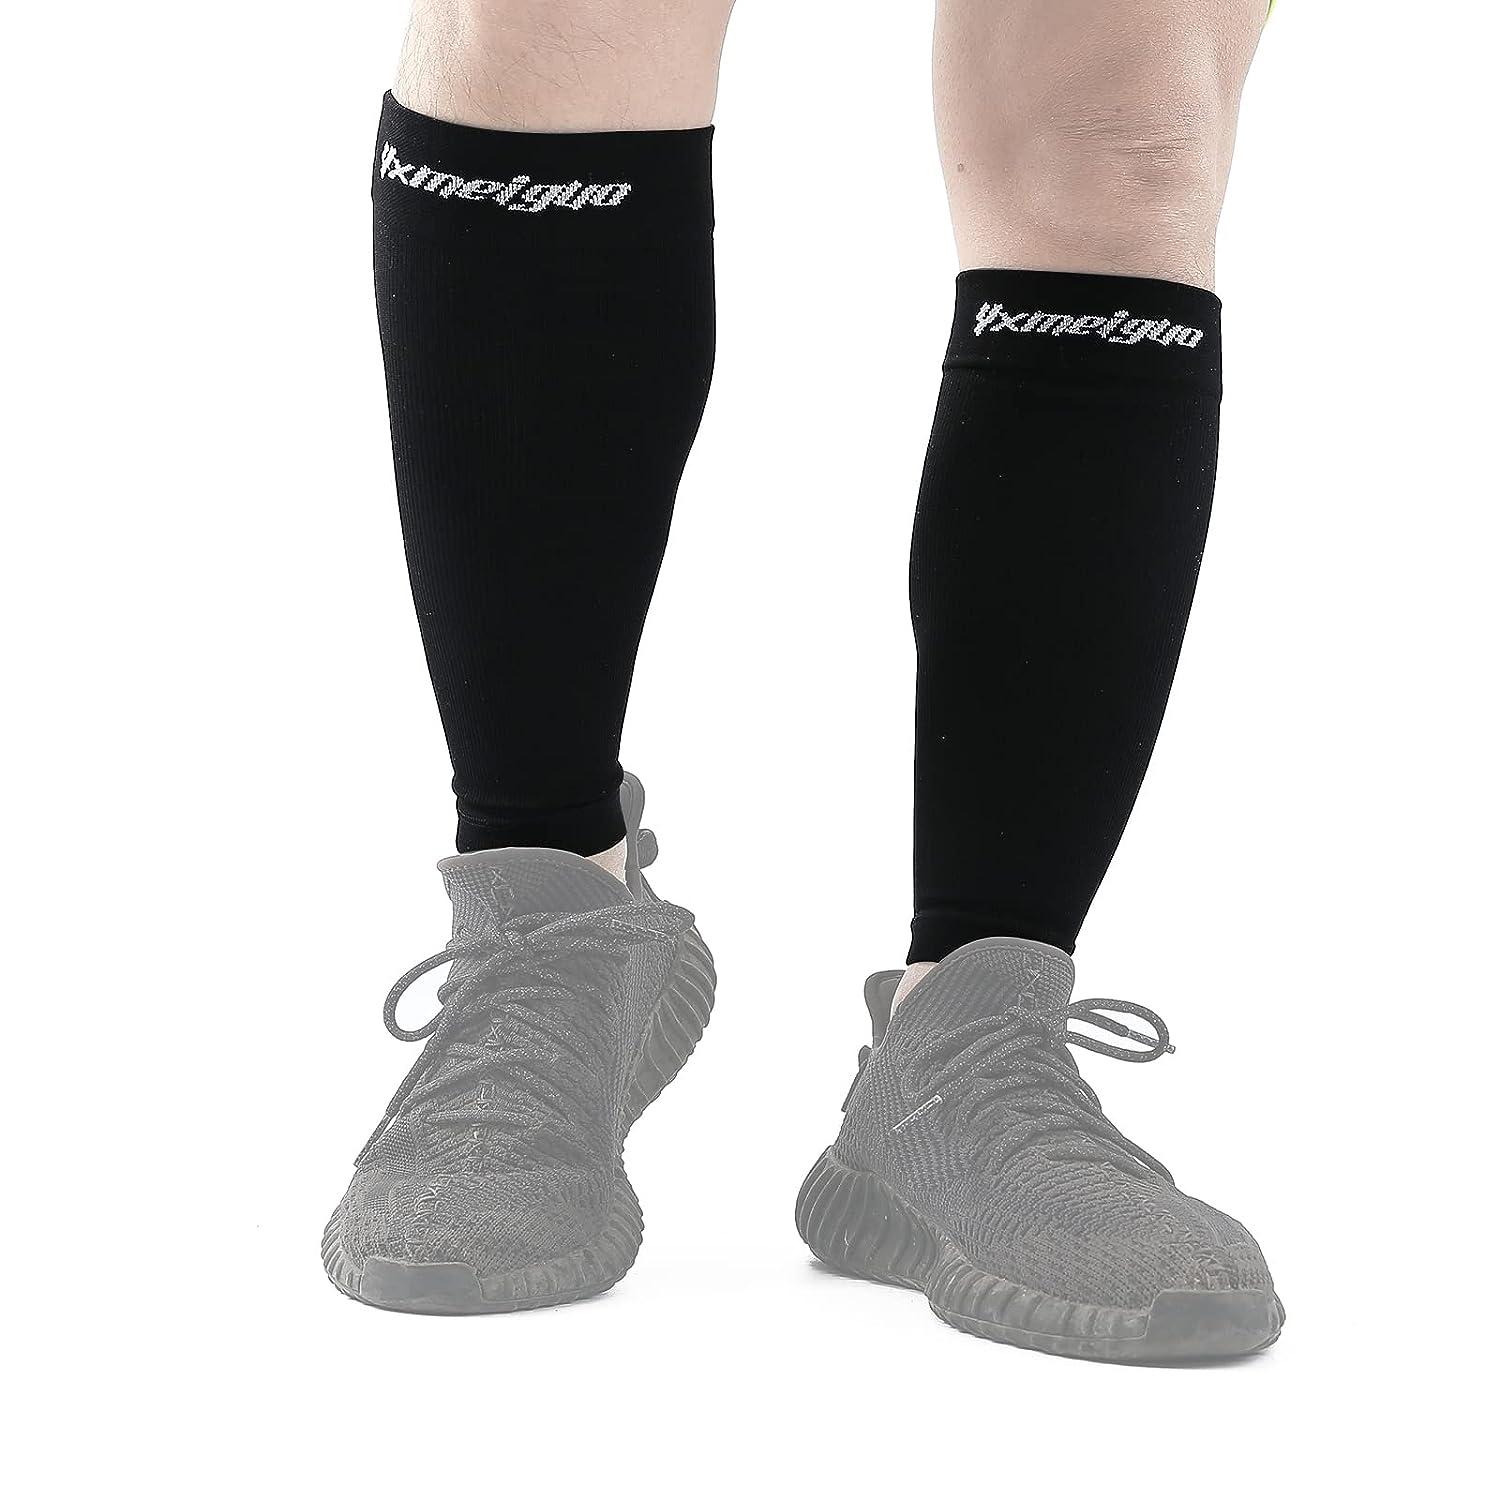 Leg Sleeve Calf Compression Sleeves Pressure Sleeves Sports Safety Leg  Support